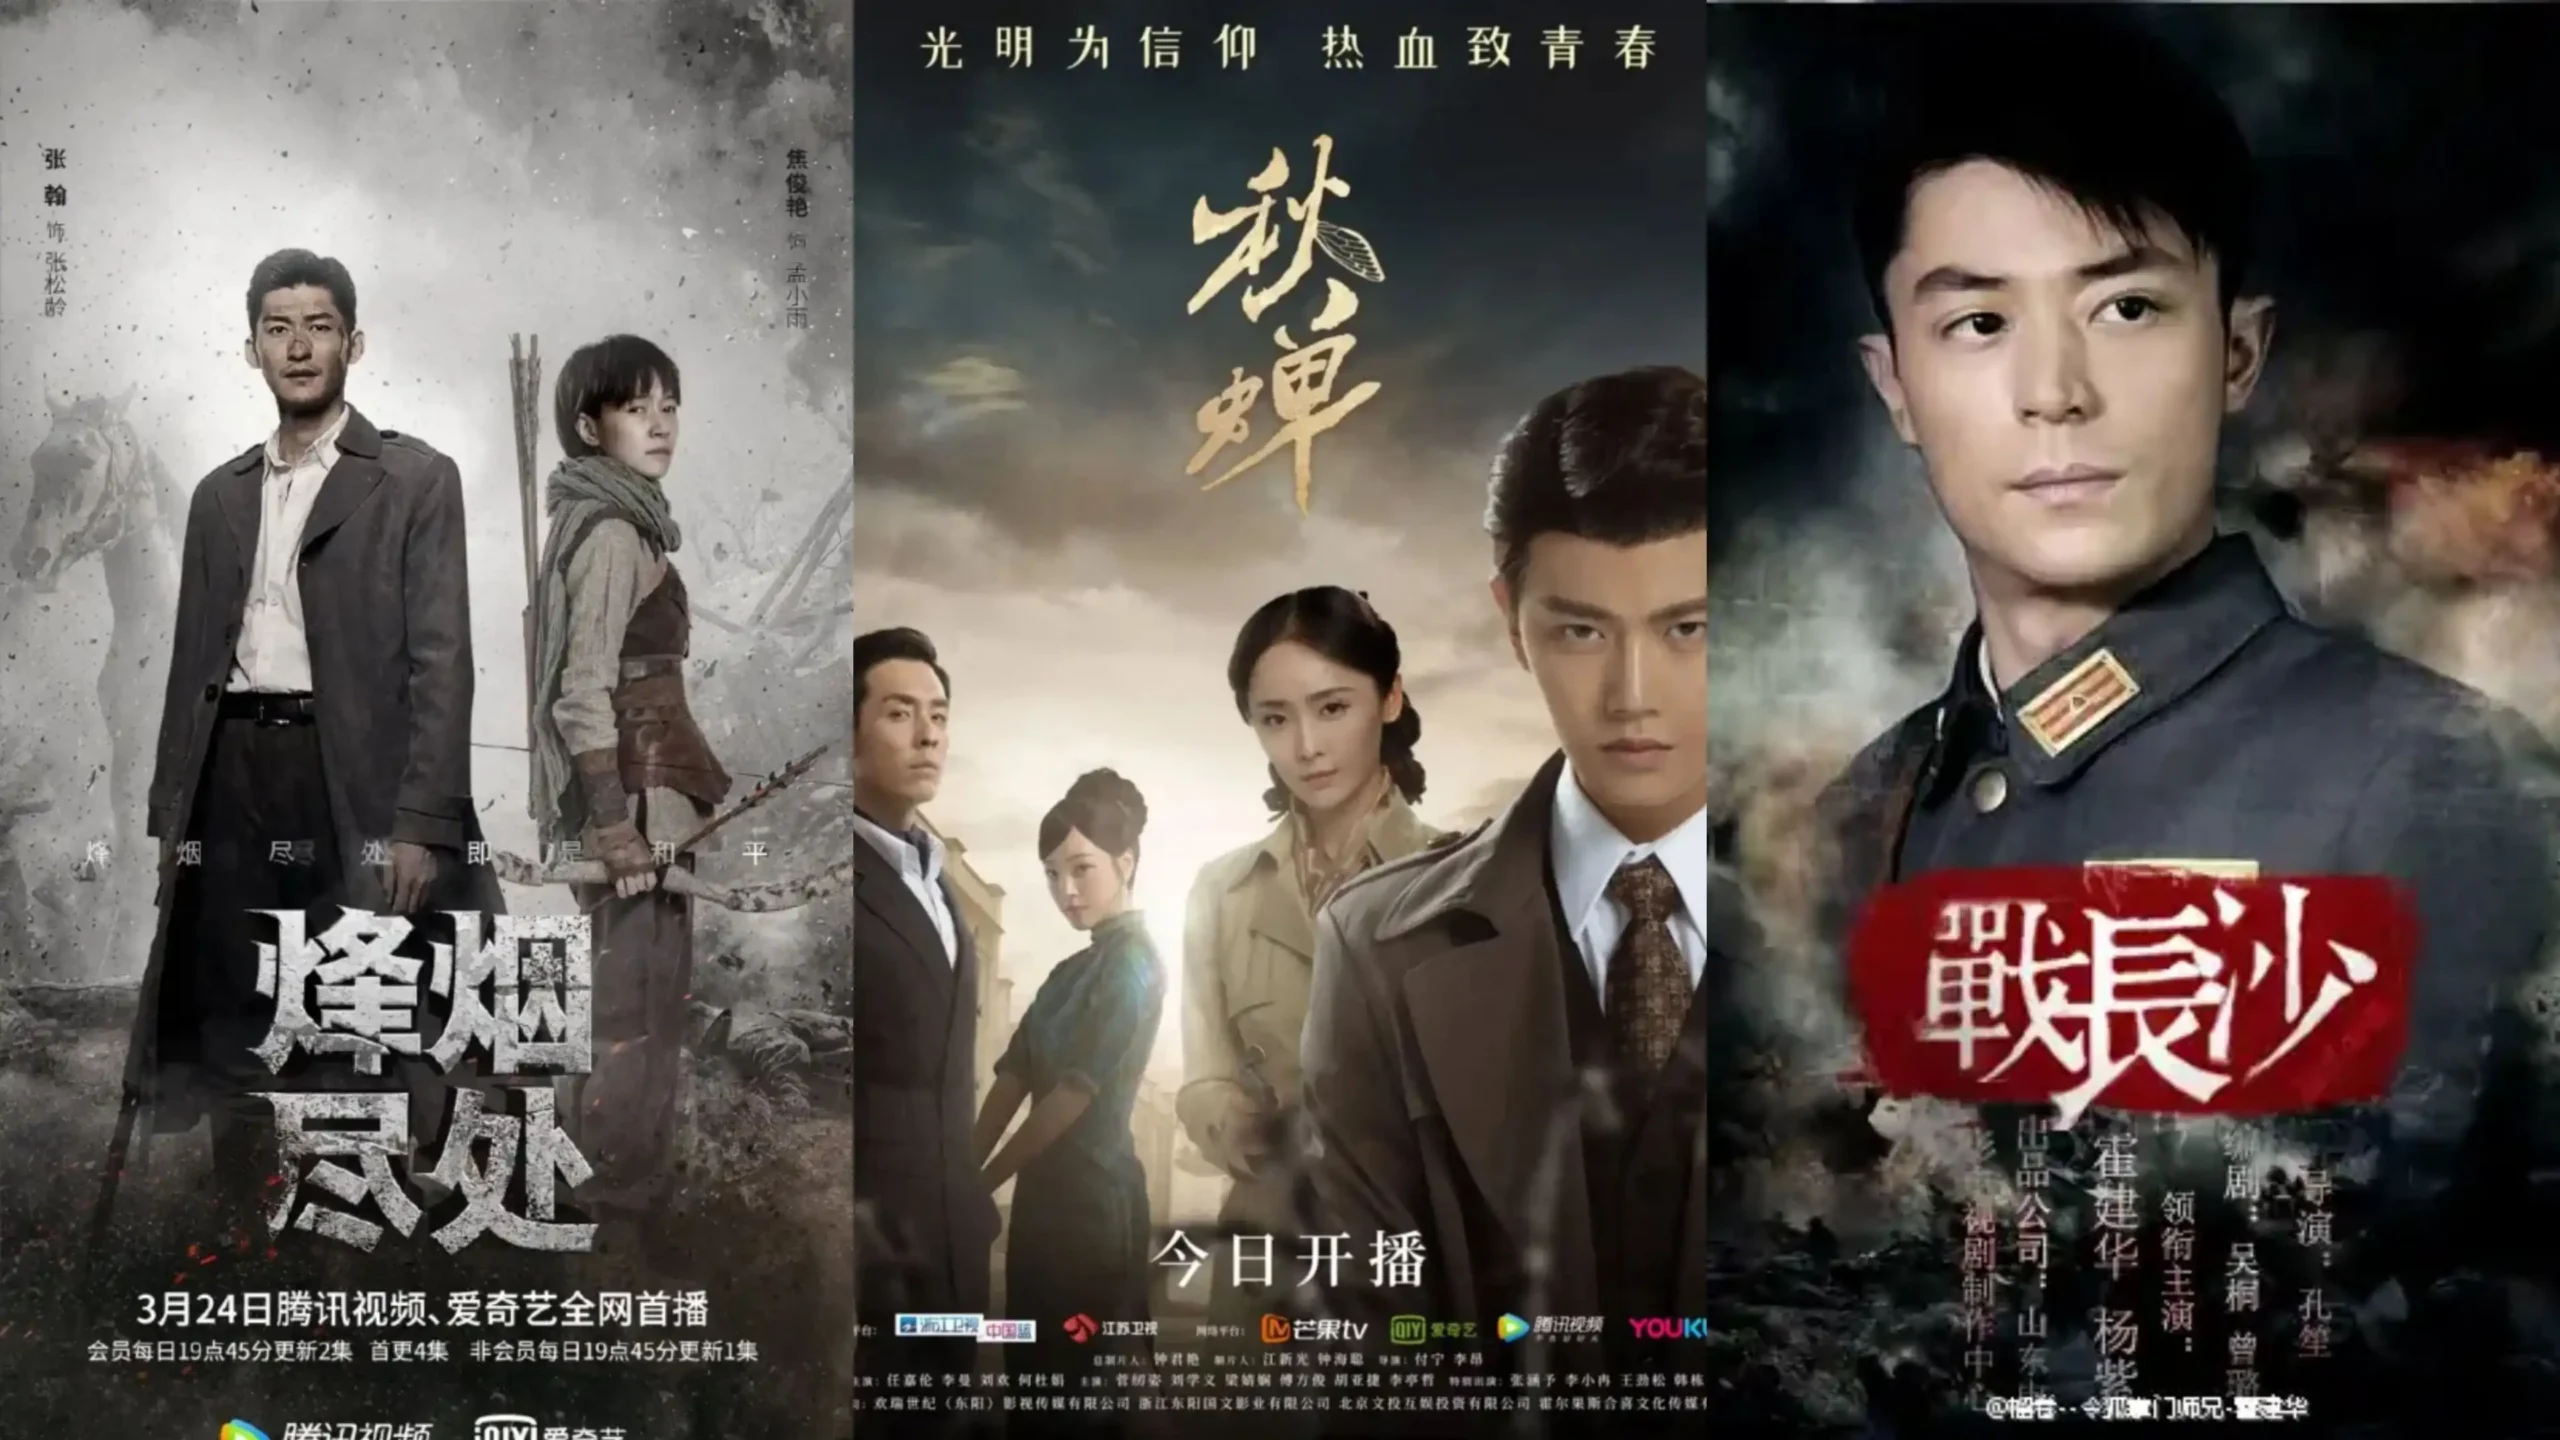 Chinese drama about war to watch scaled